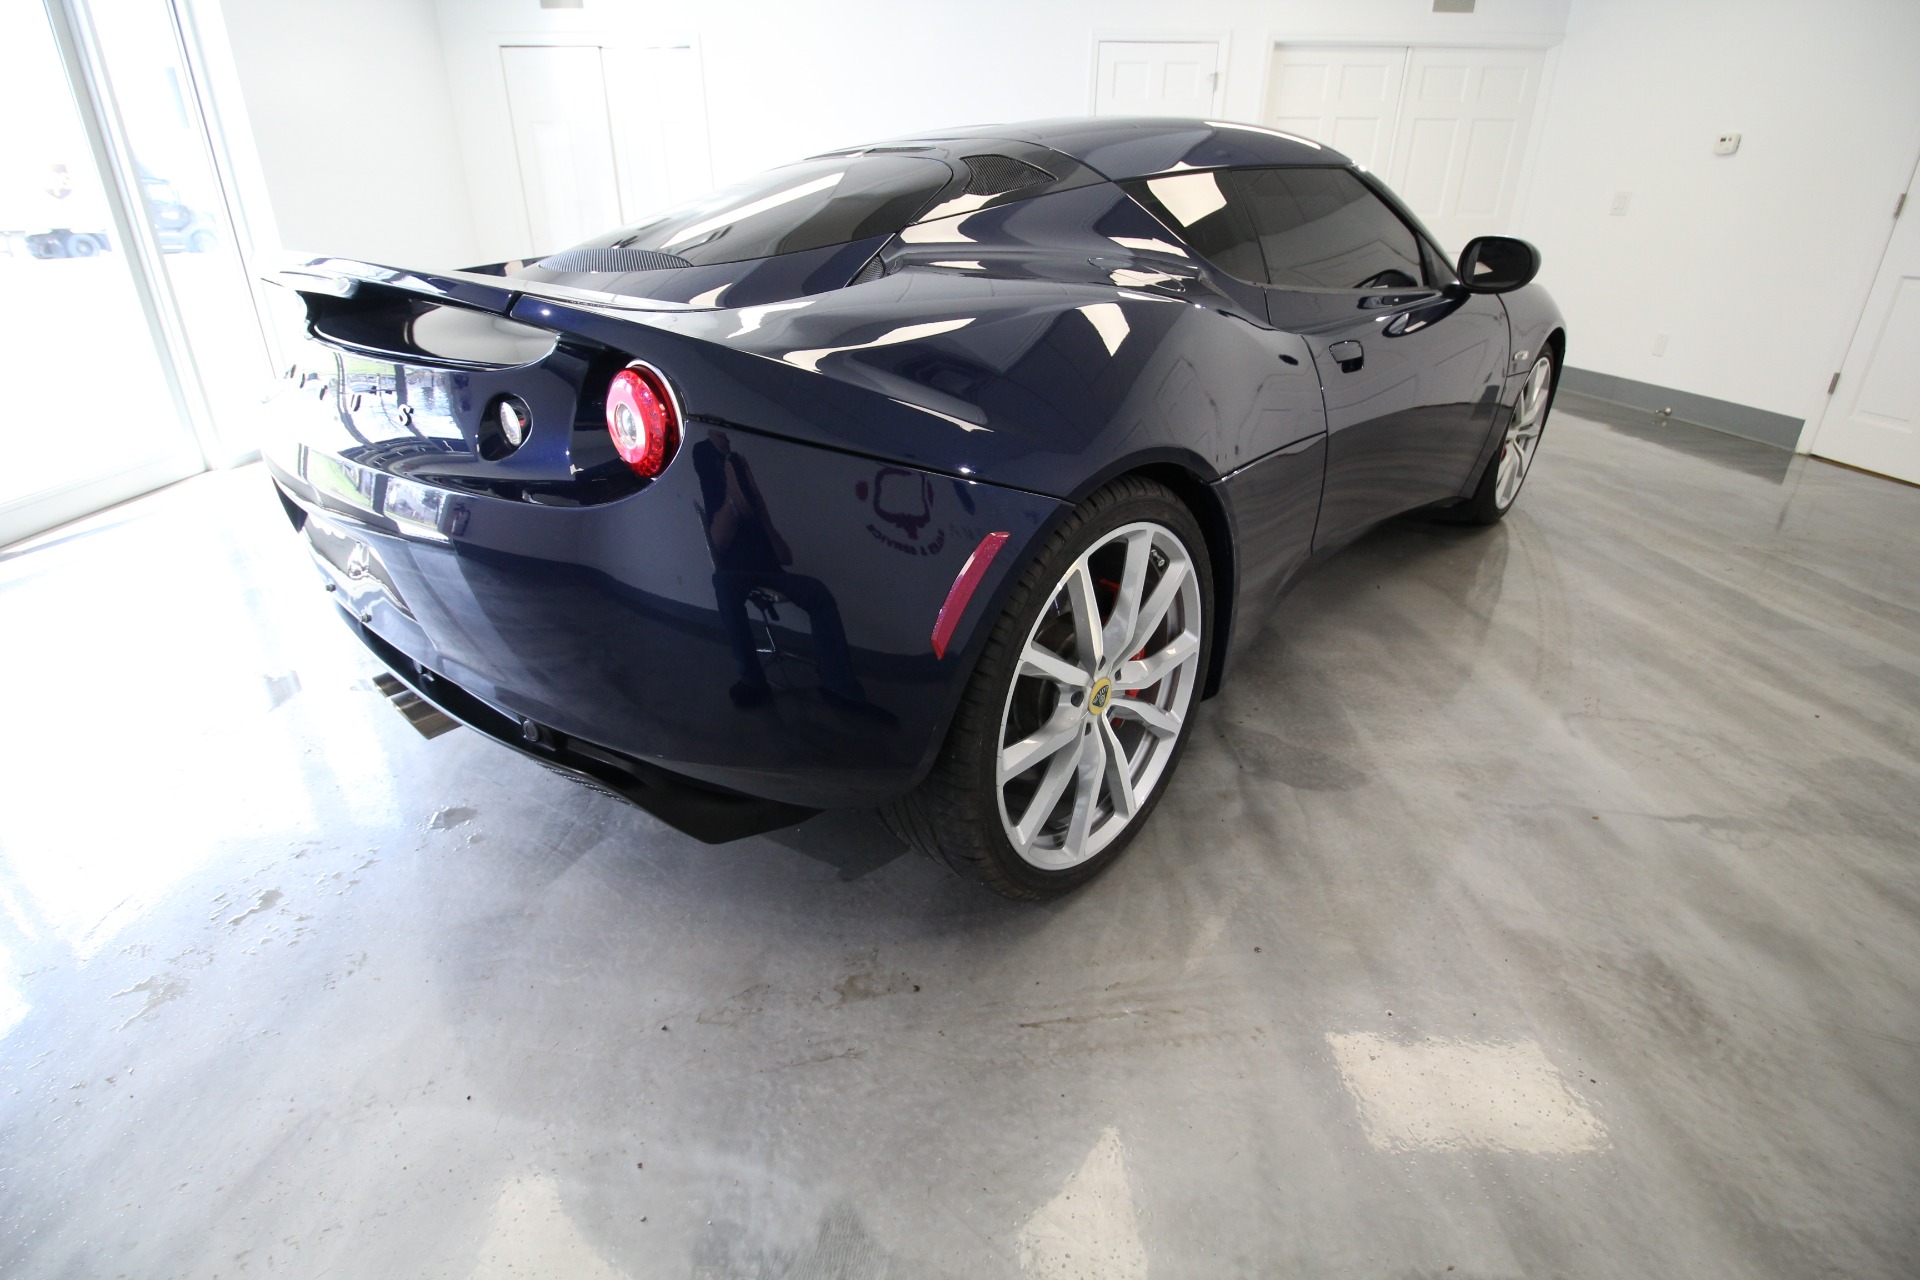 Used 2013 BLUE Lotus Evora Coupe 2+2 LOW MILES SUPER CLEAN NEW CAR TRADE WITH US | Albany, NY